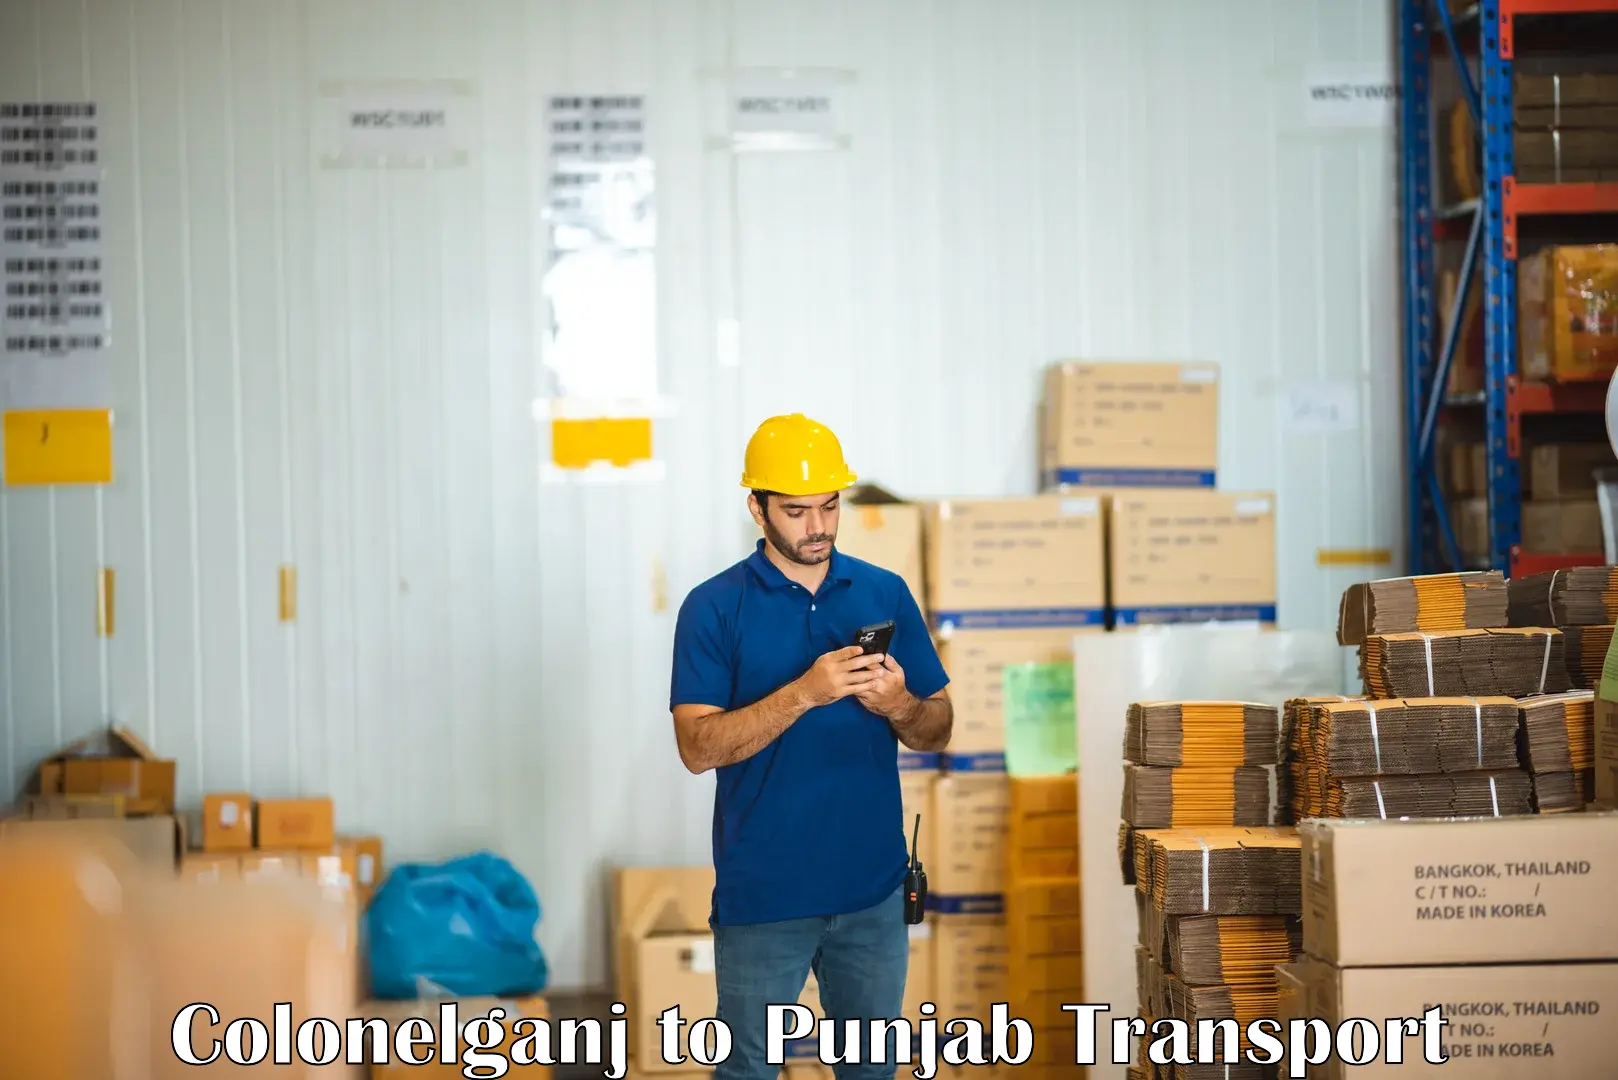 Delivery service Colonelganj to Punjab